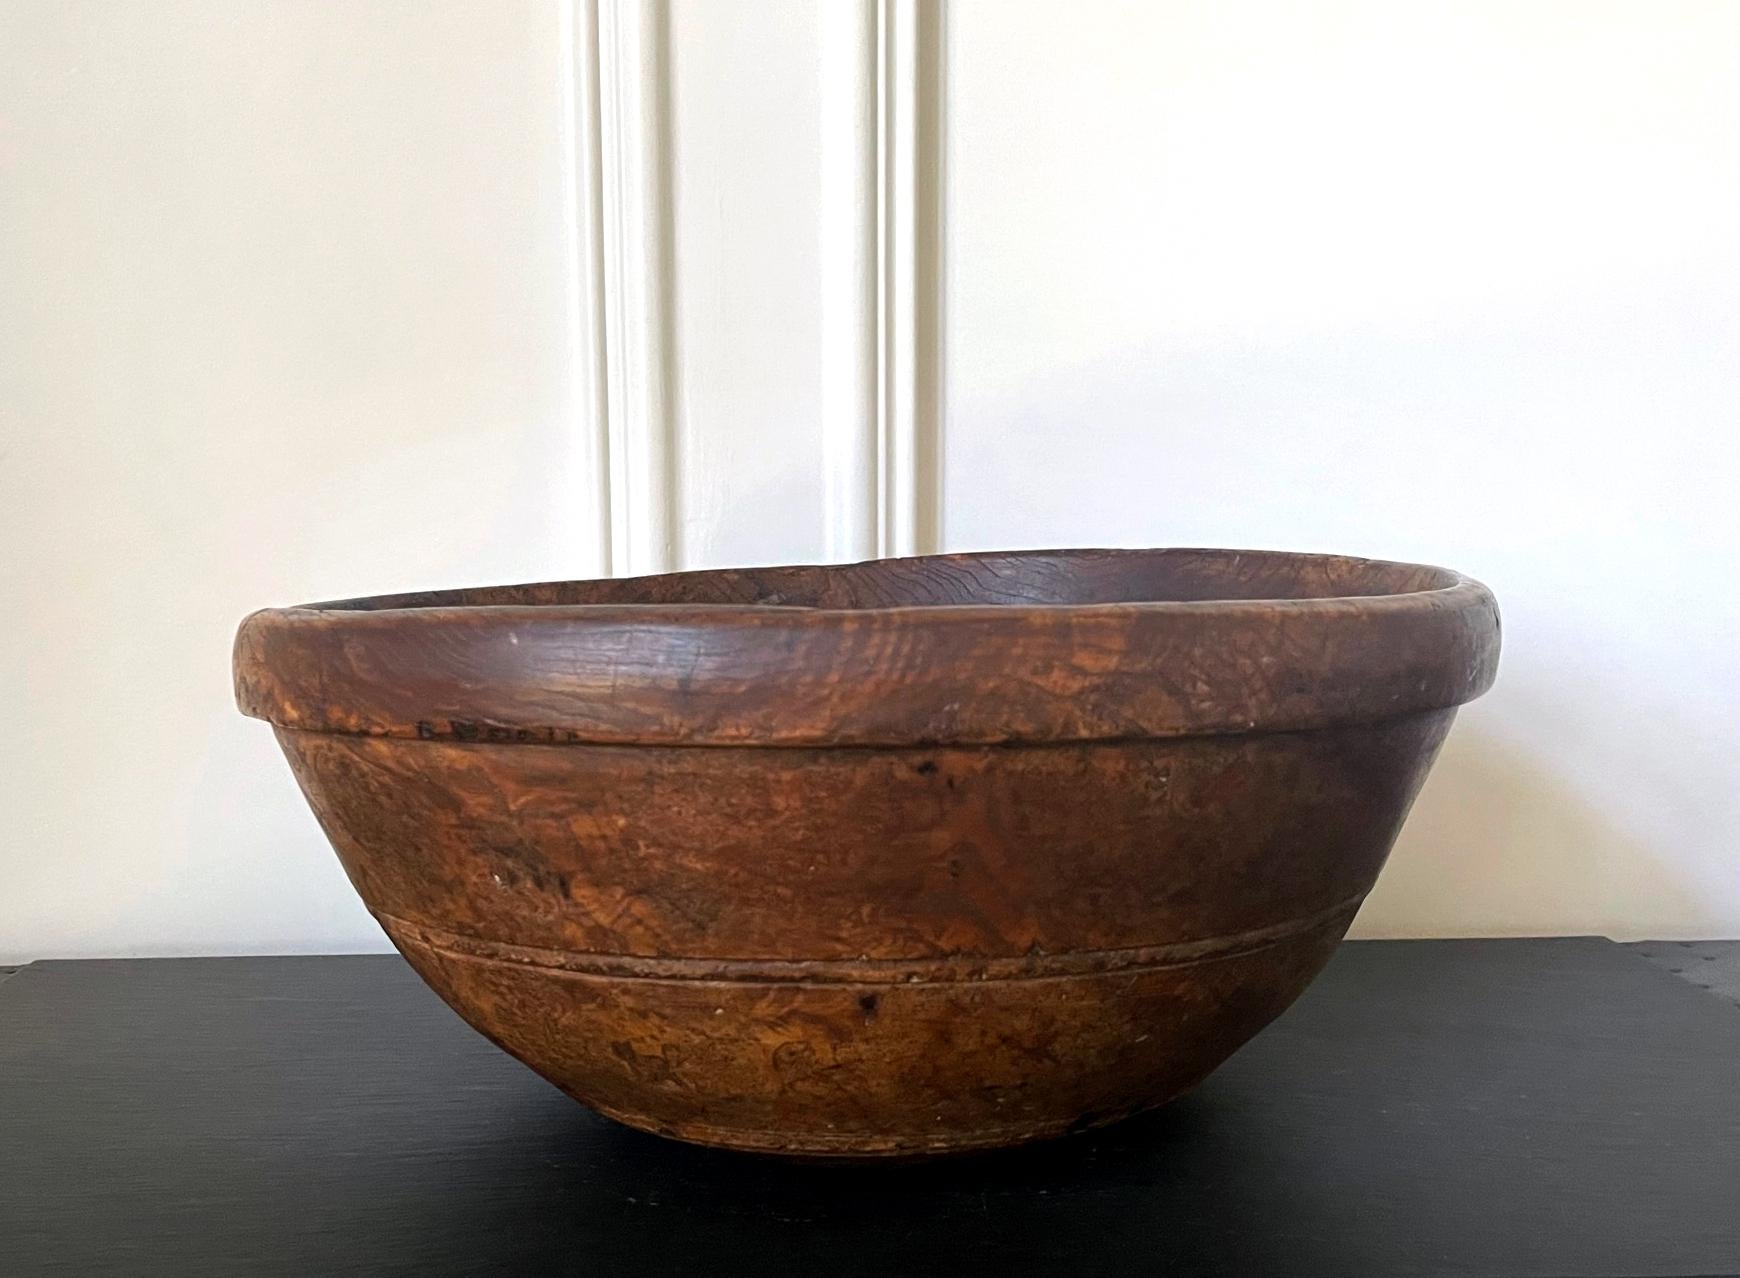 A large American turned wood bowl with impressive burl grains and original surface circa early to mid-19th century, likely from Northeastern states. The hand-turned bowl was likely from maple burl, judged from the color and the grains. It has a